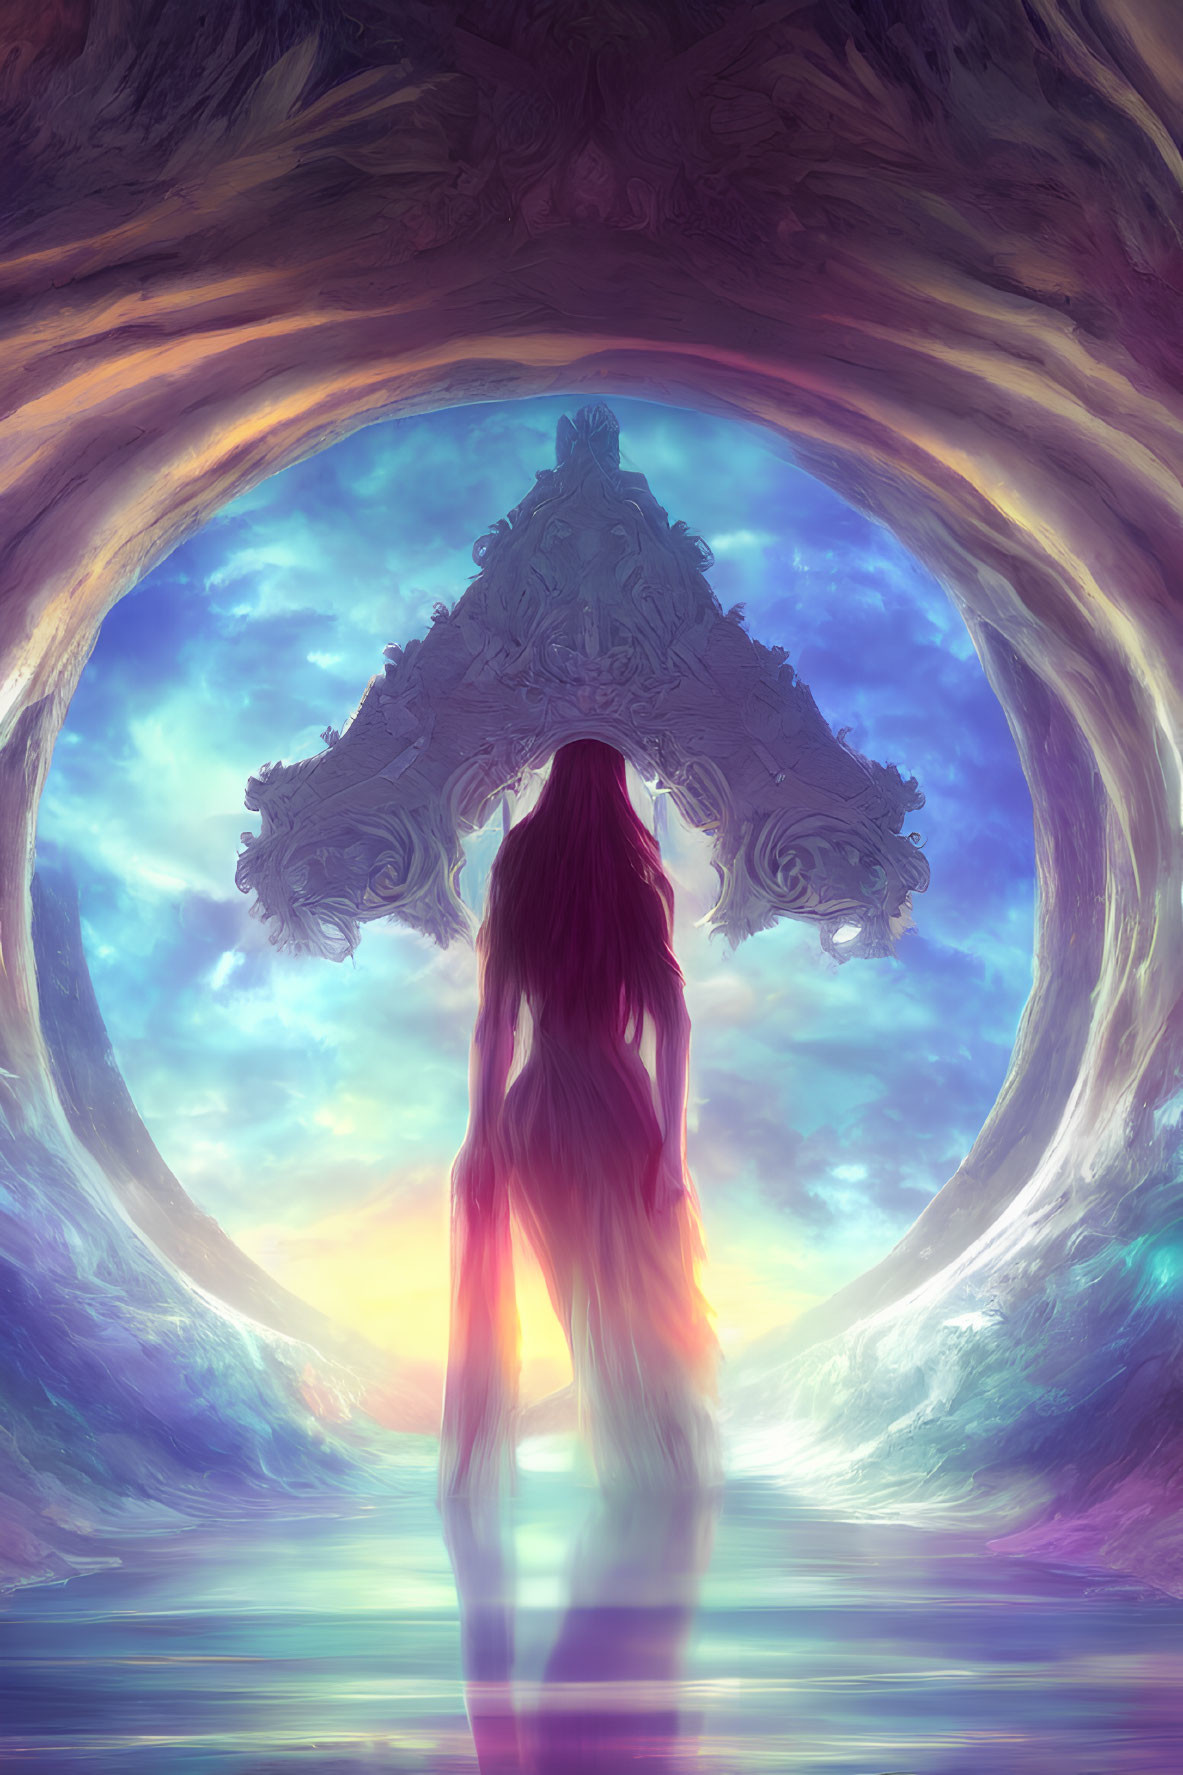 Long-haired individual gazes at mystical archway and vibrant nebula sky.